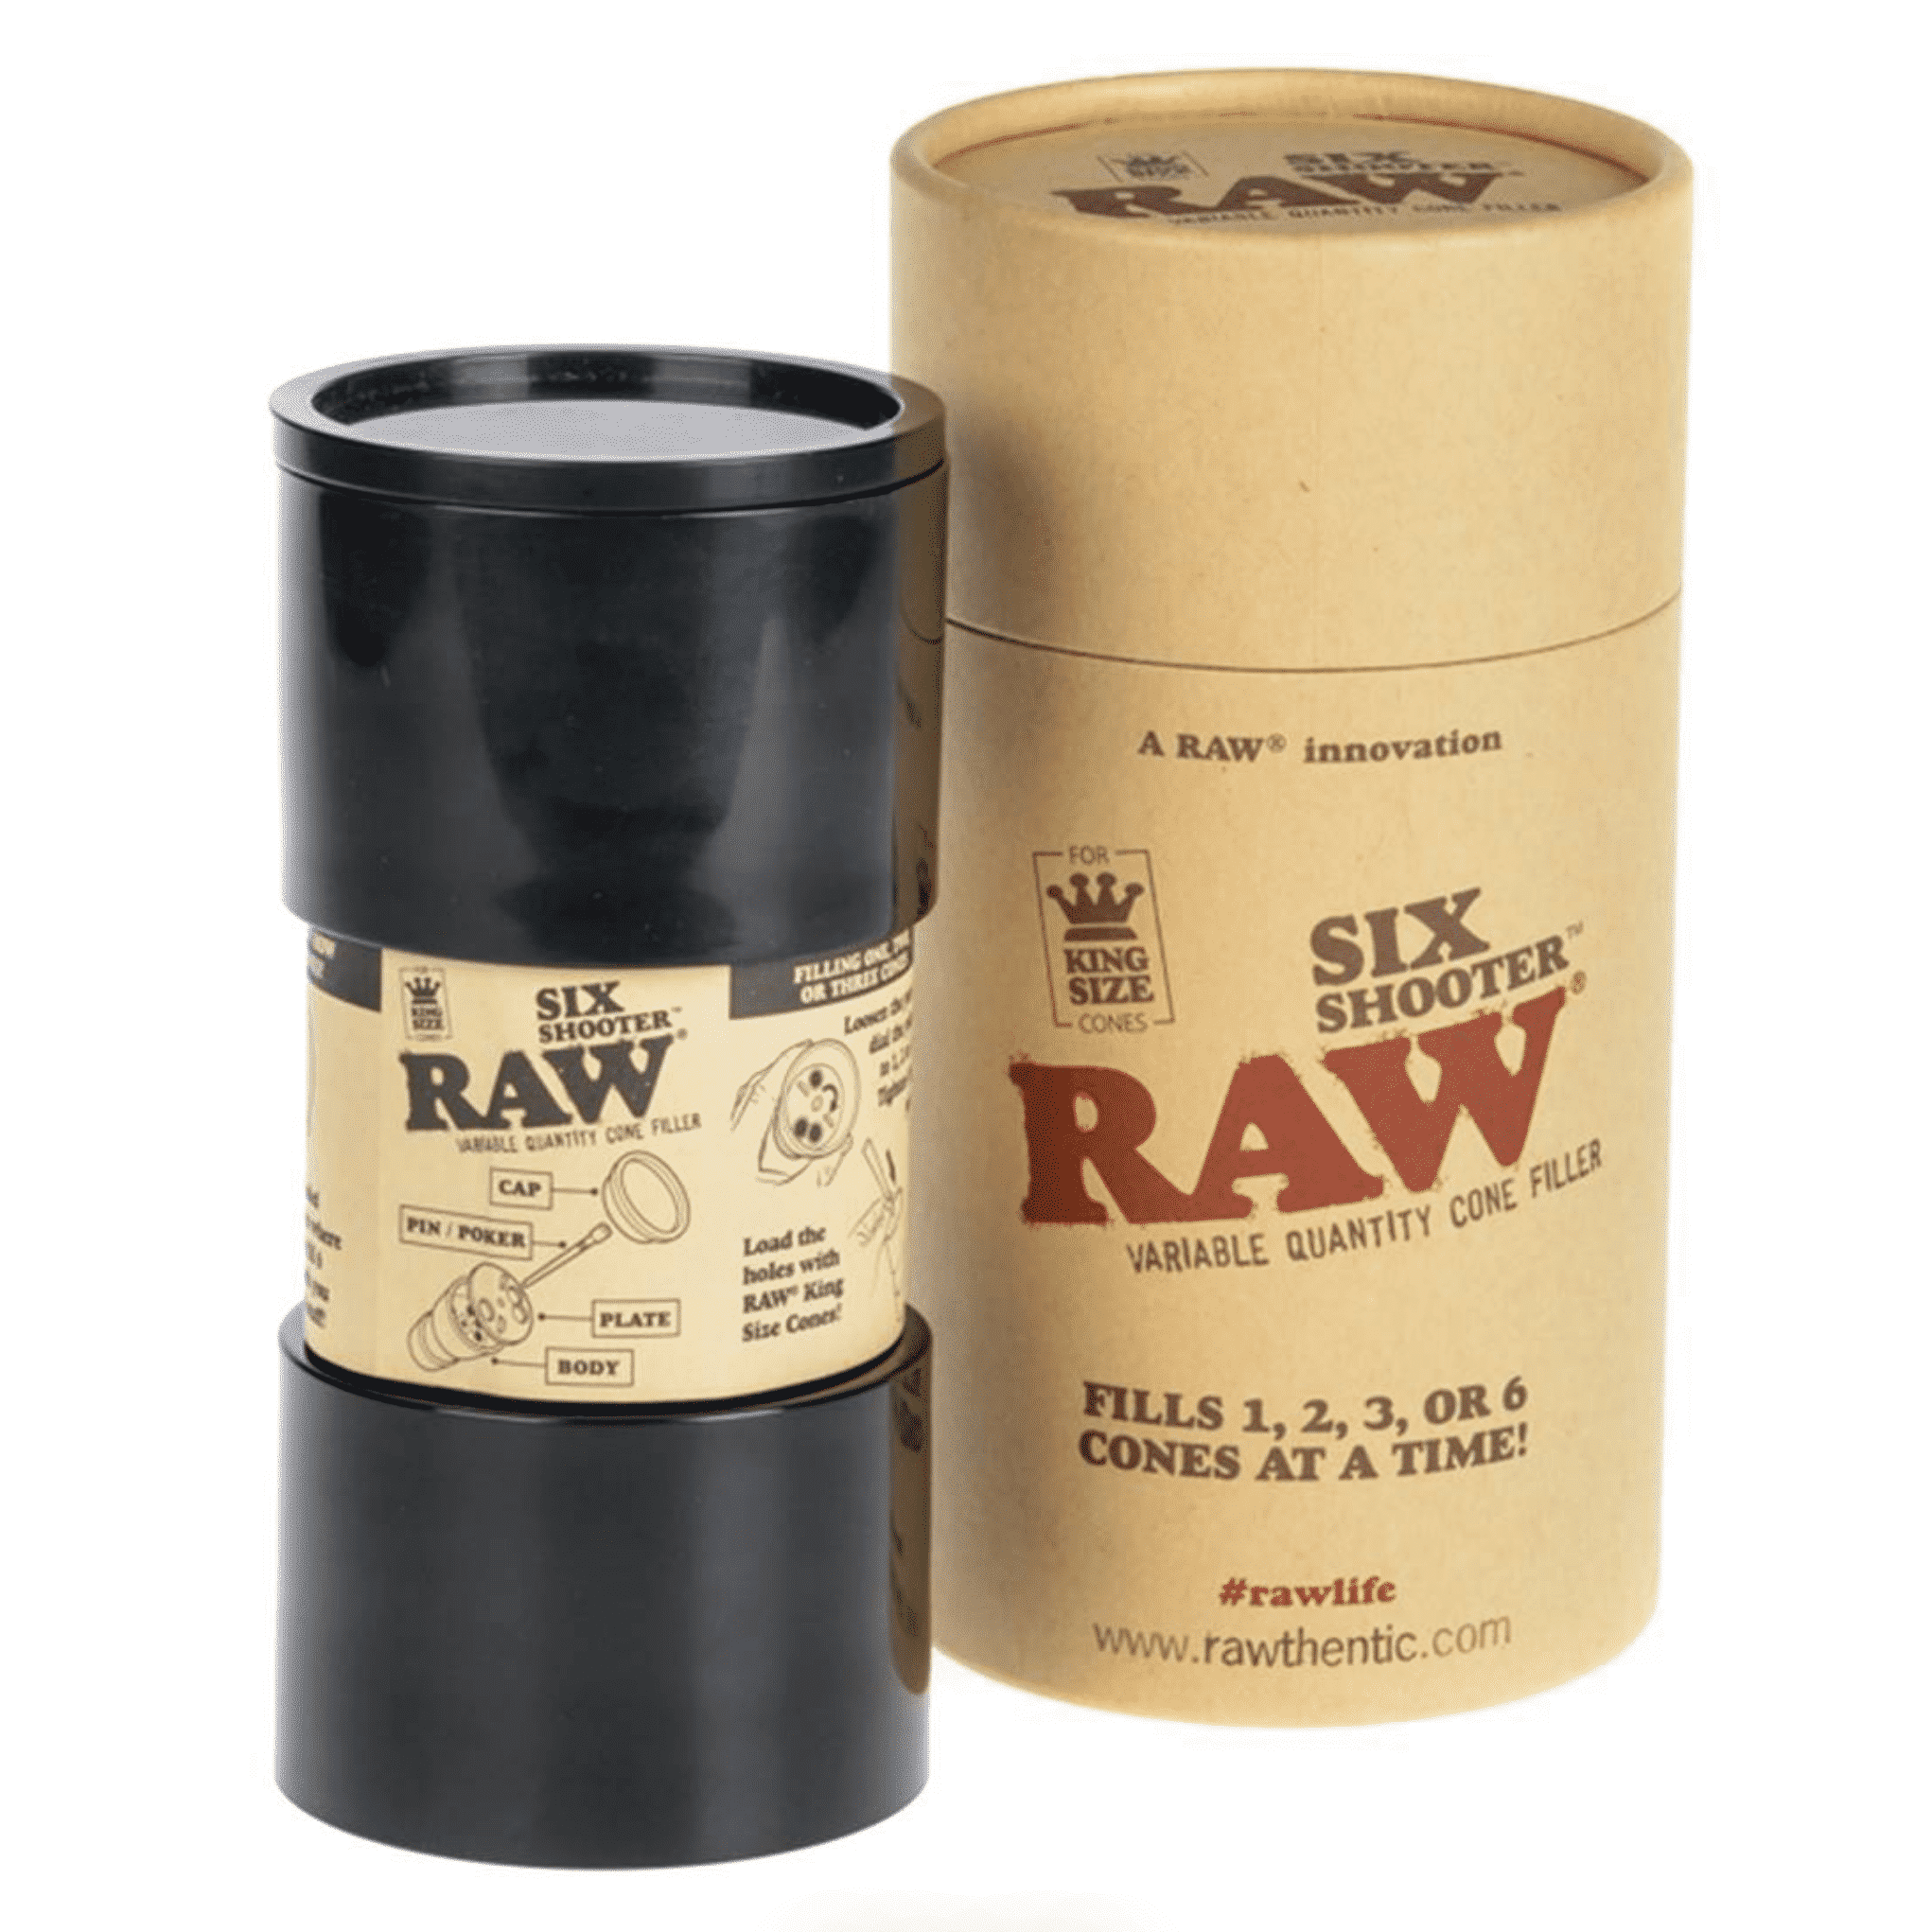 RAW SIX SHOOTER : Remplisseur 6 Cones Raw